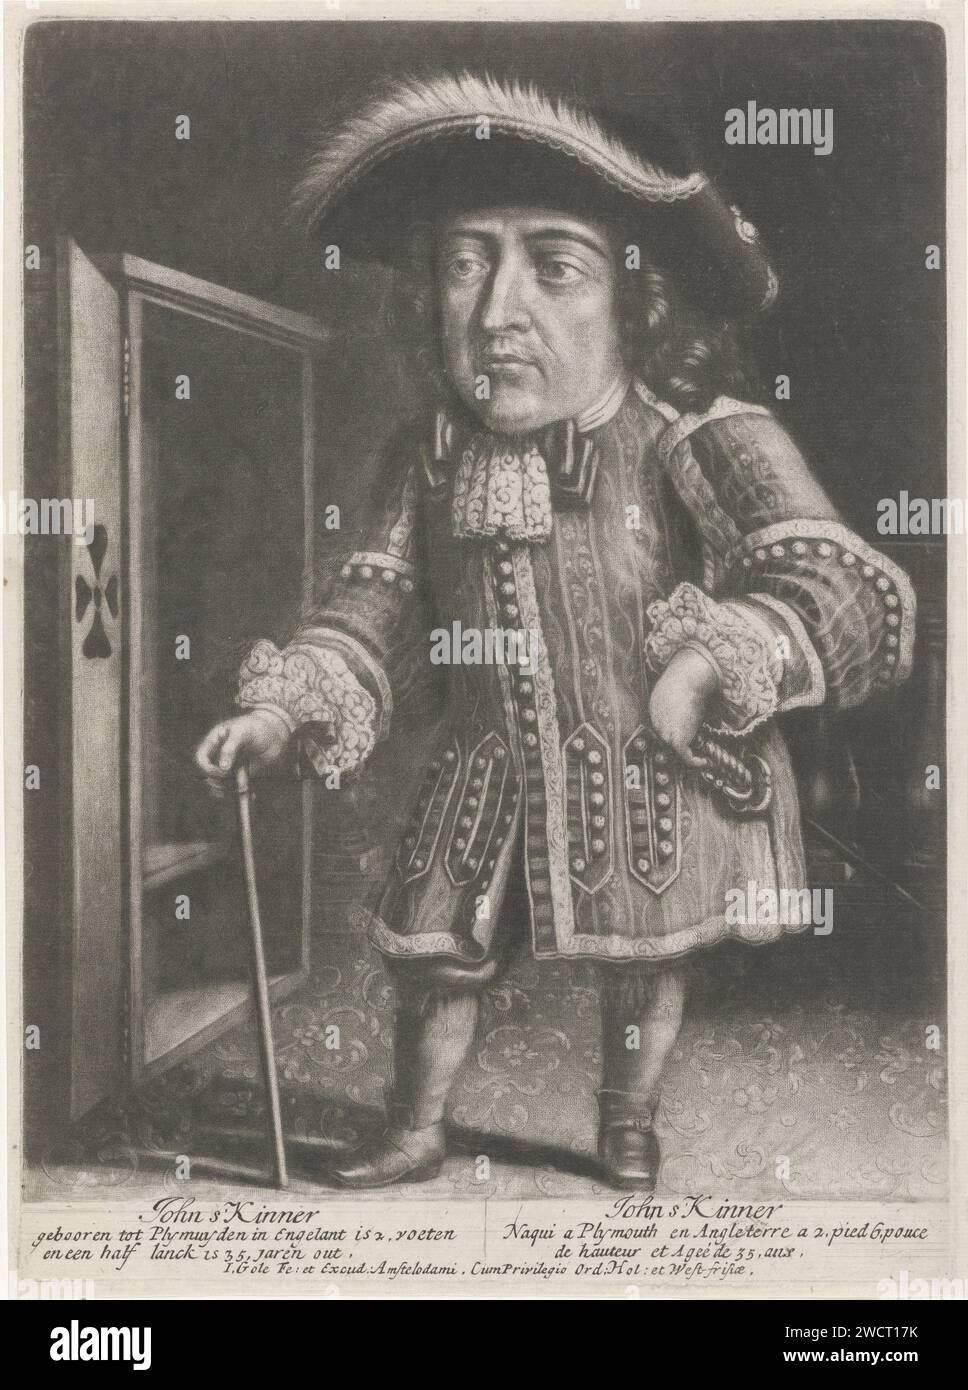 Portrated Van John Skinner, Jacob Gole, 1670 - 1724 print The English dwarf John Skinner at the age of 35. He was born in Plymouth in 1663. In the margin his name, age and height. Amsterdam paper engraving little people Stock Photo